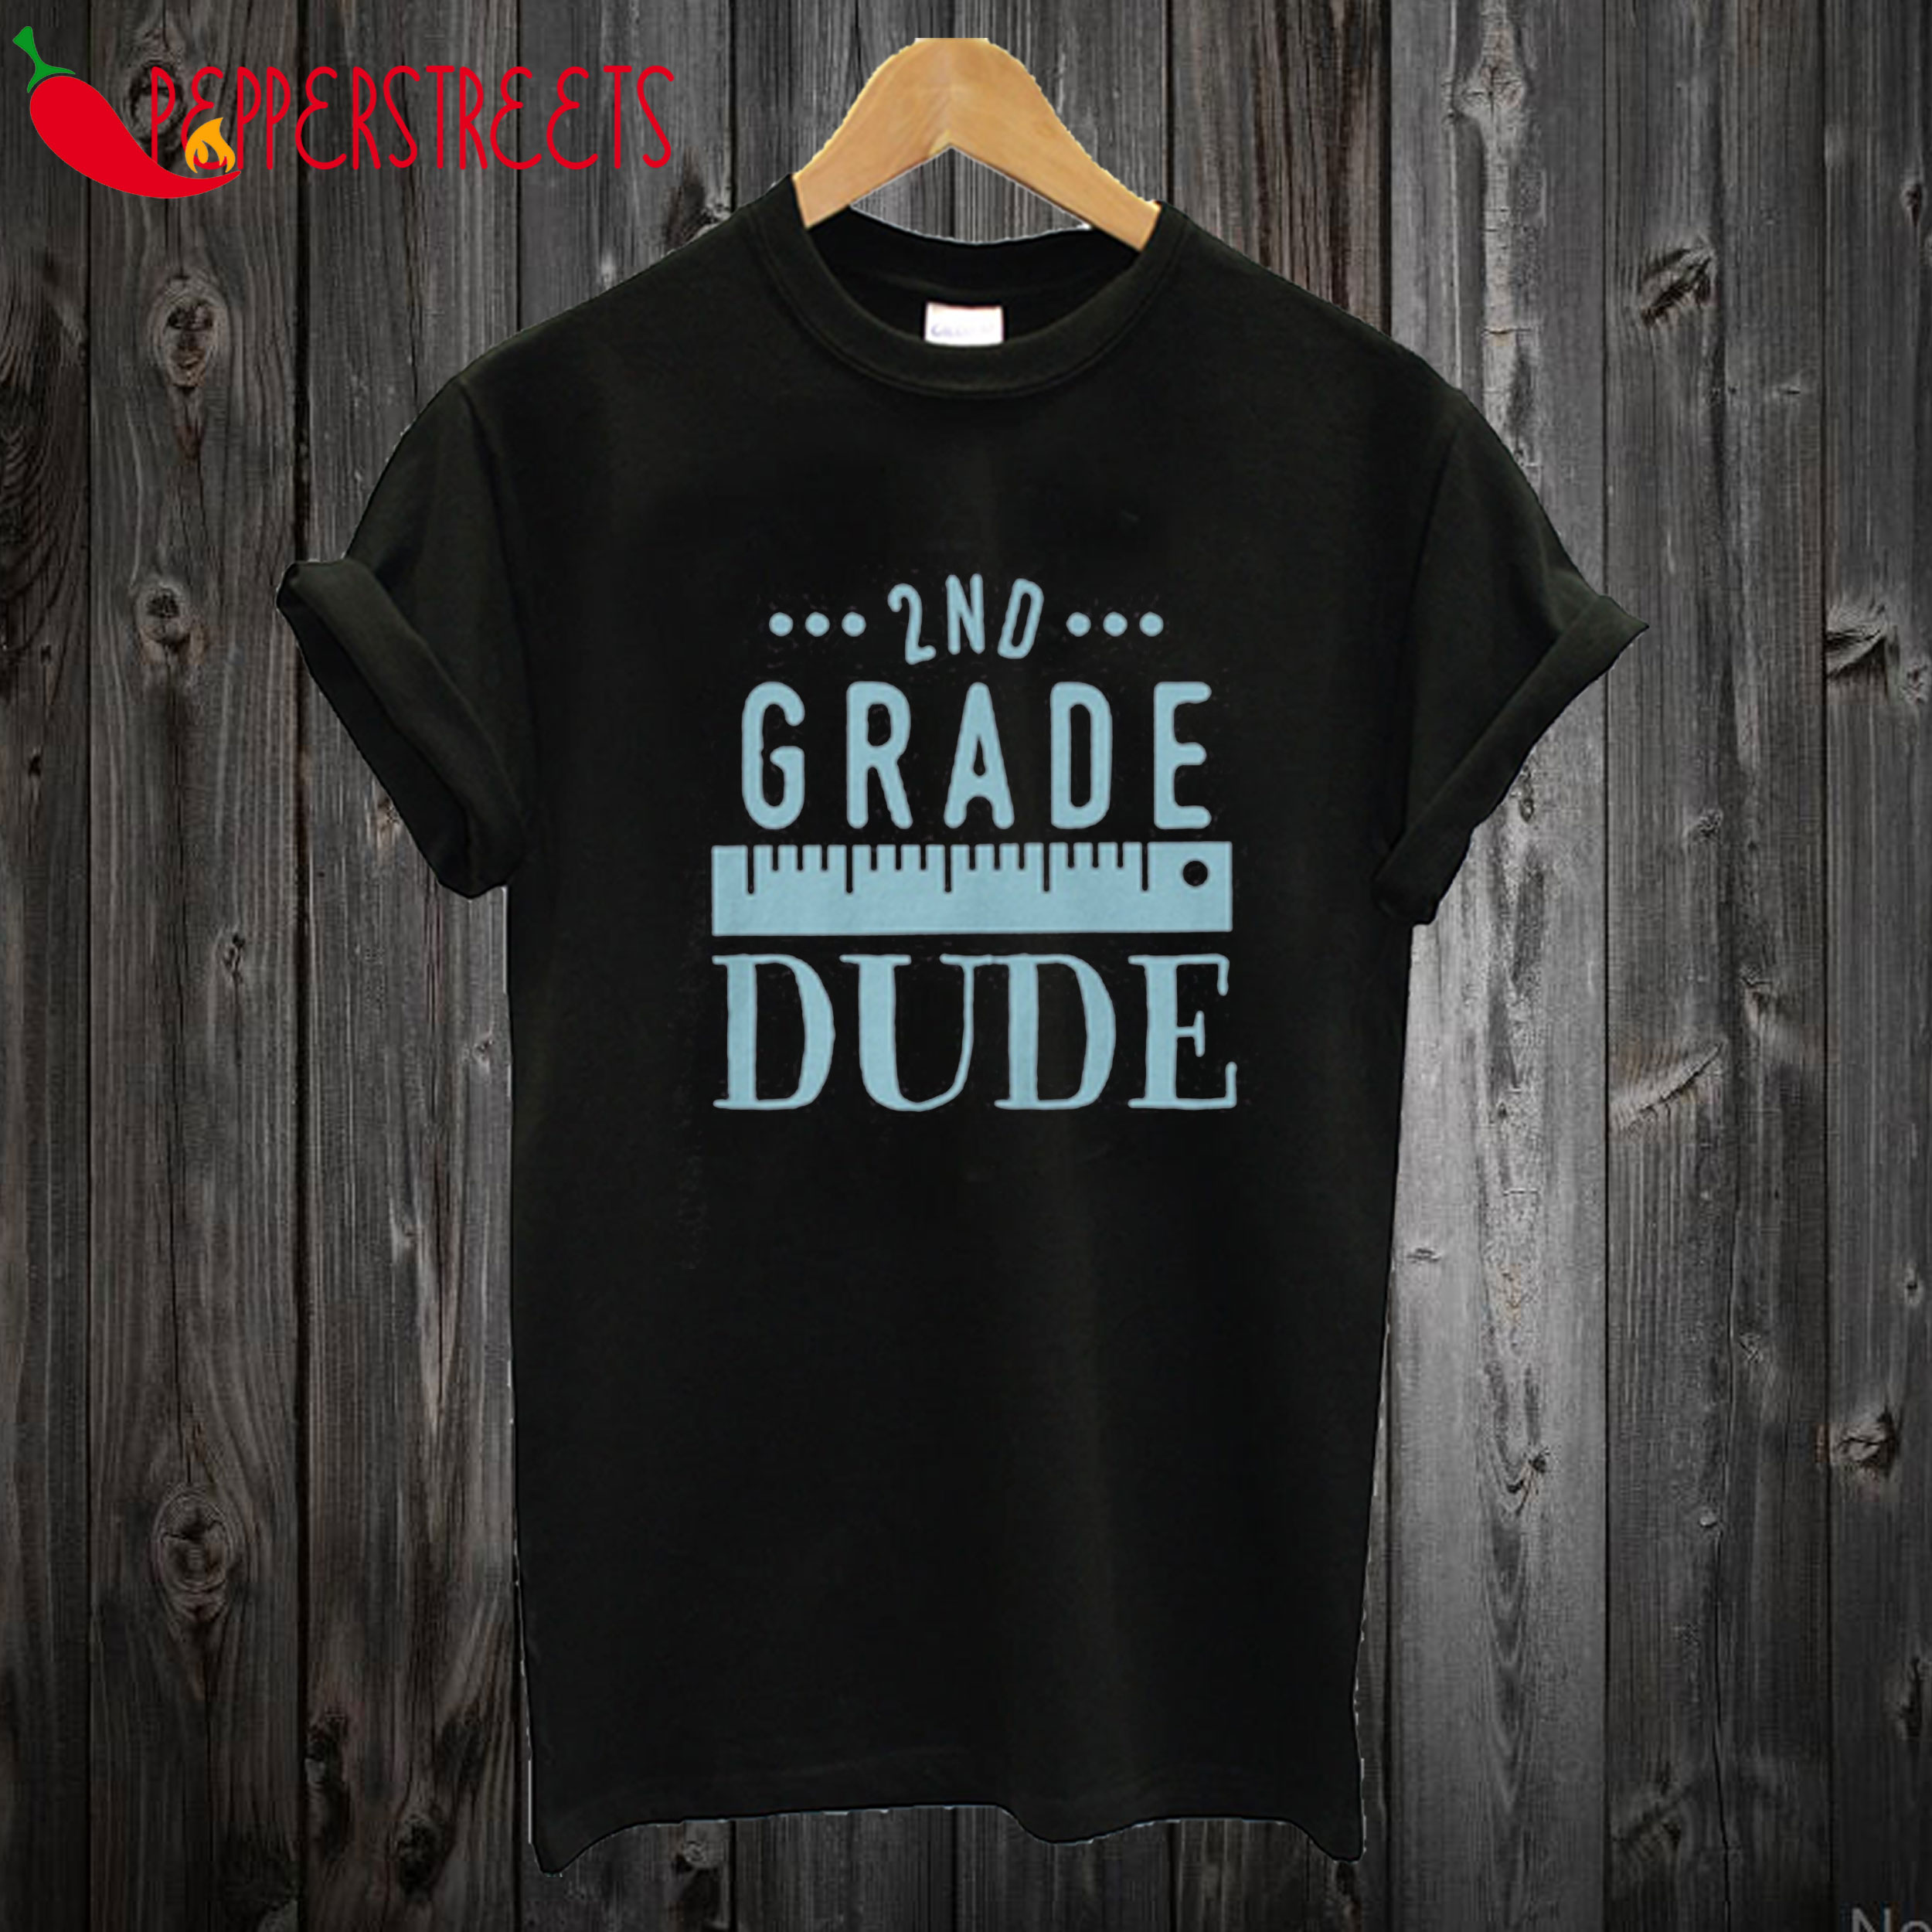 2nd Grede Dute T shirt